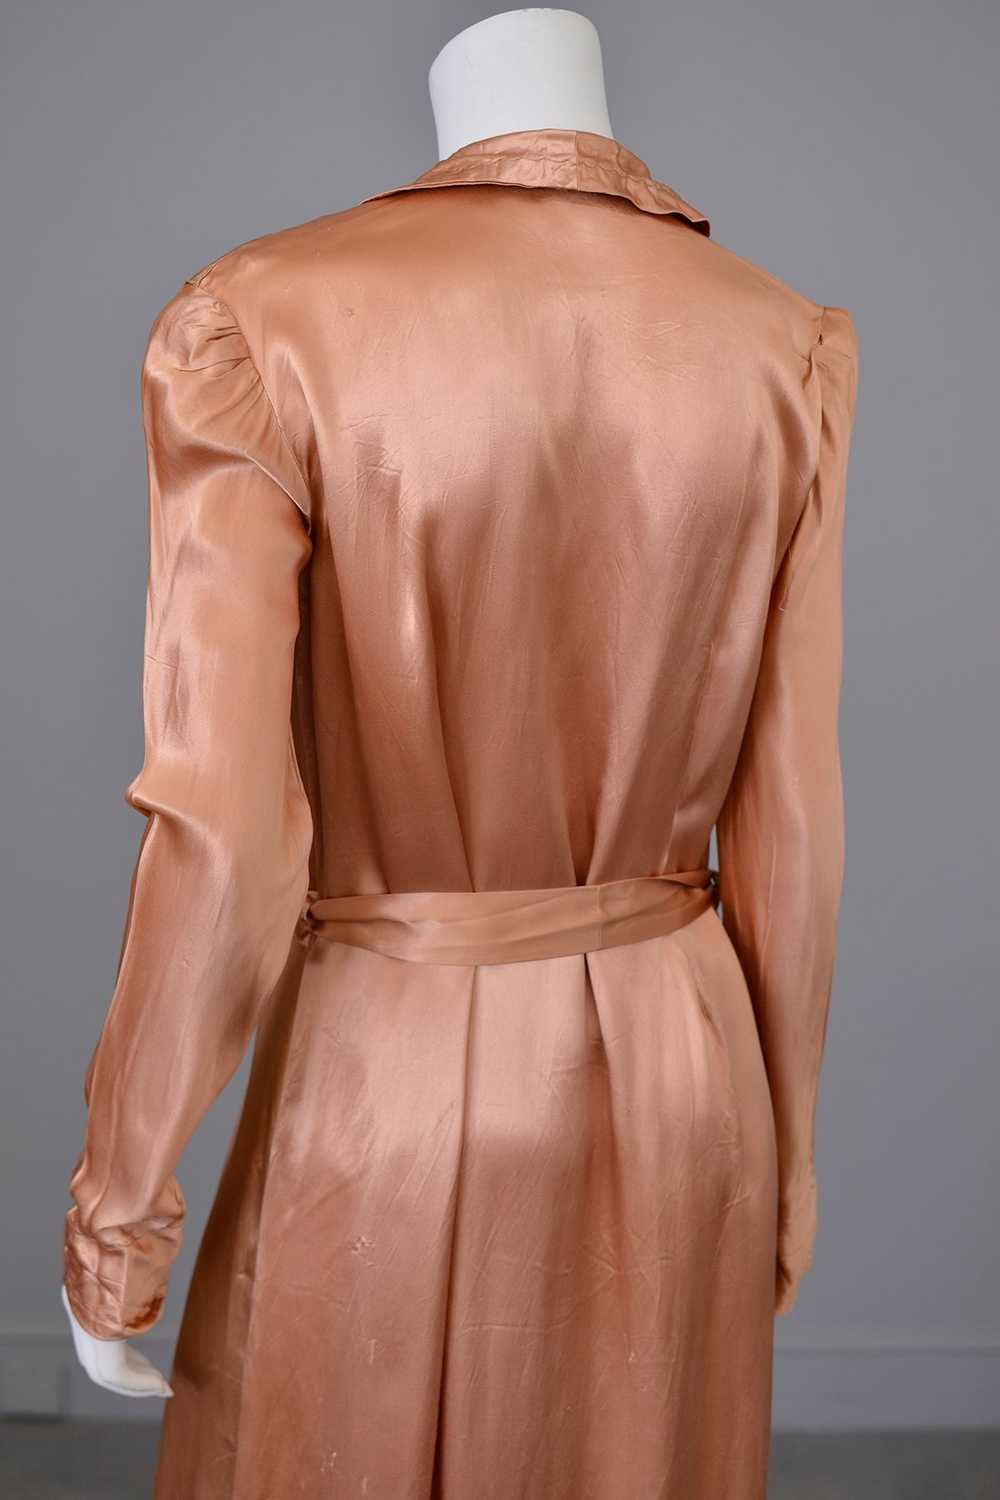 1940s Copper Satin Lounging Robe - image 6